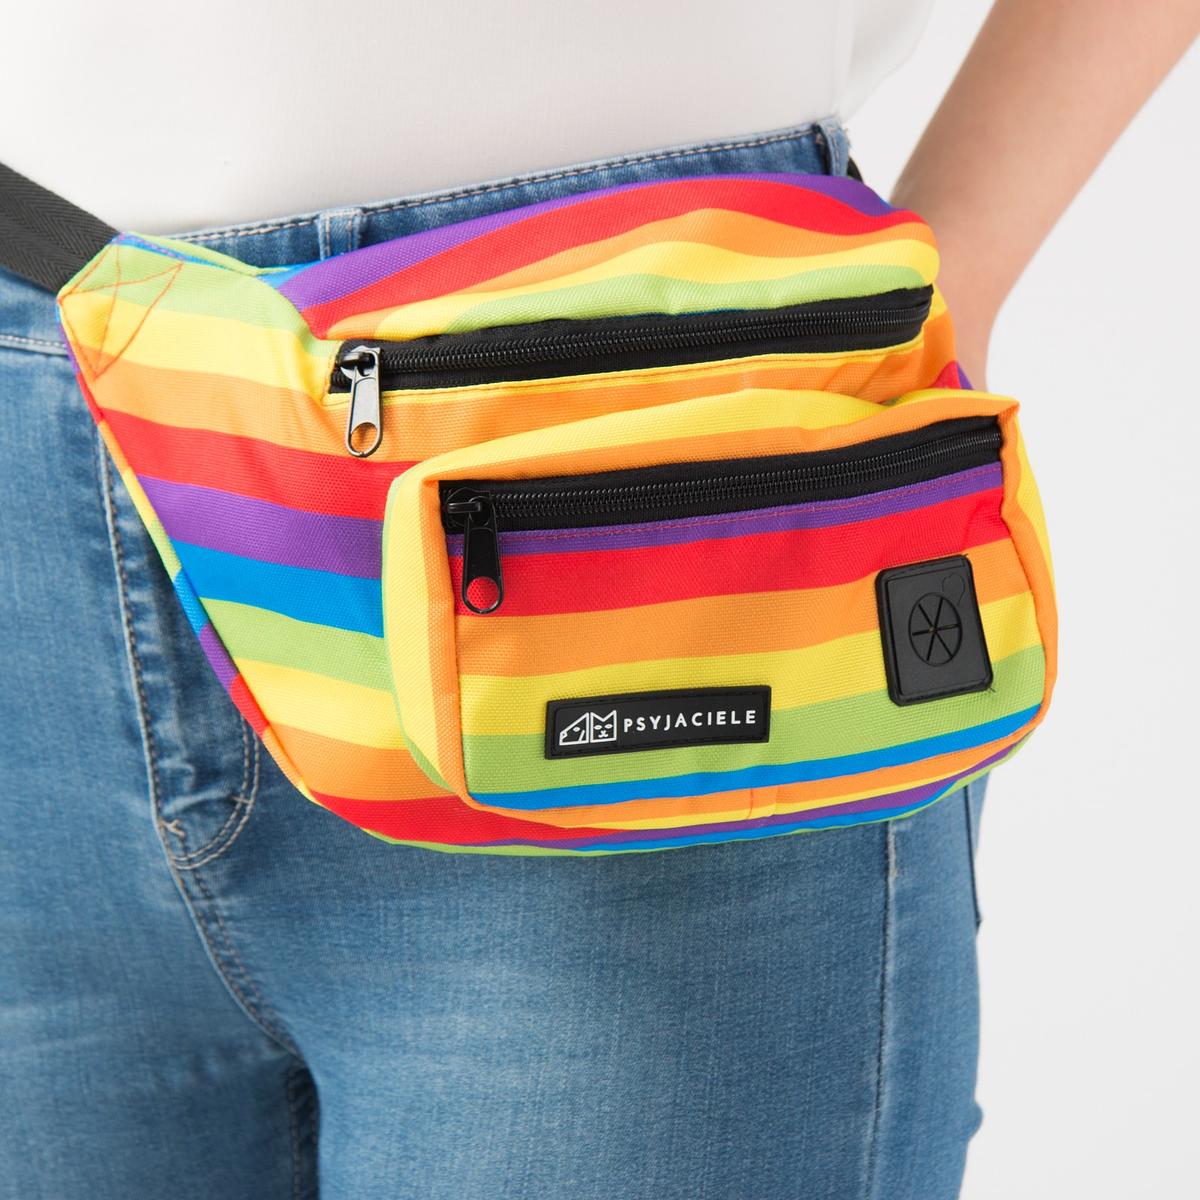 Fanny pack "Love, Equality, Teethers"